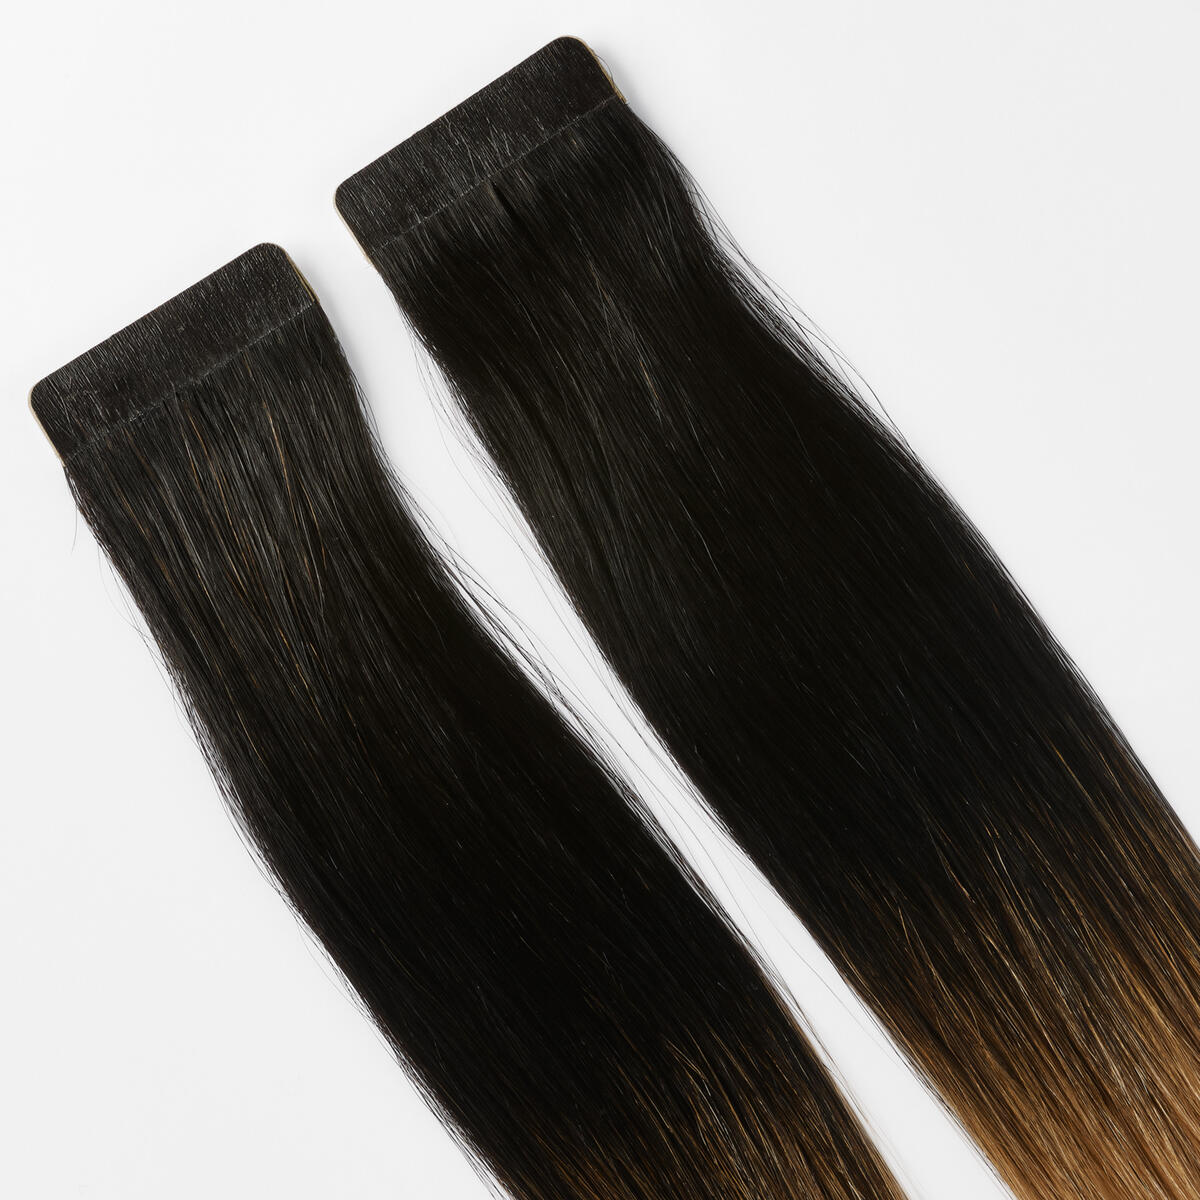 Basic Tape Extensions Classic 4 O1.2/7.5 Black Blond Ombre 40 cm